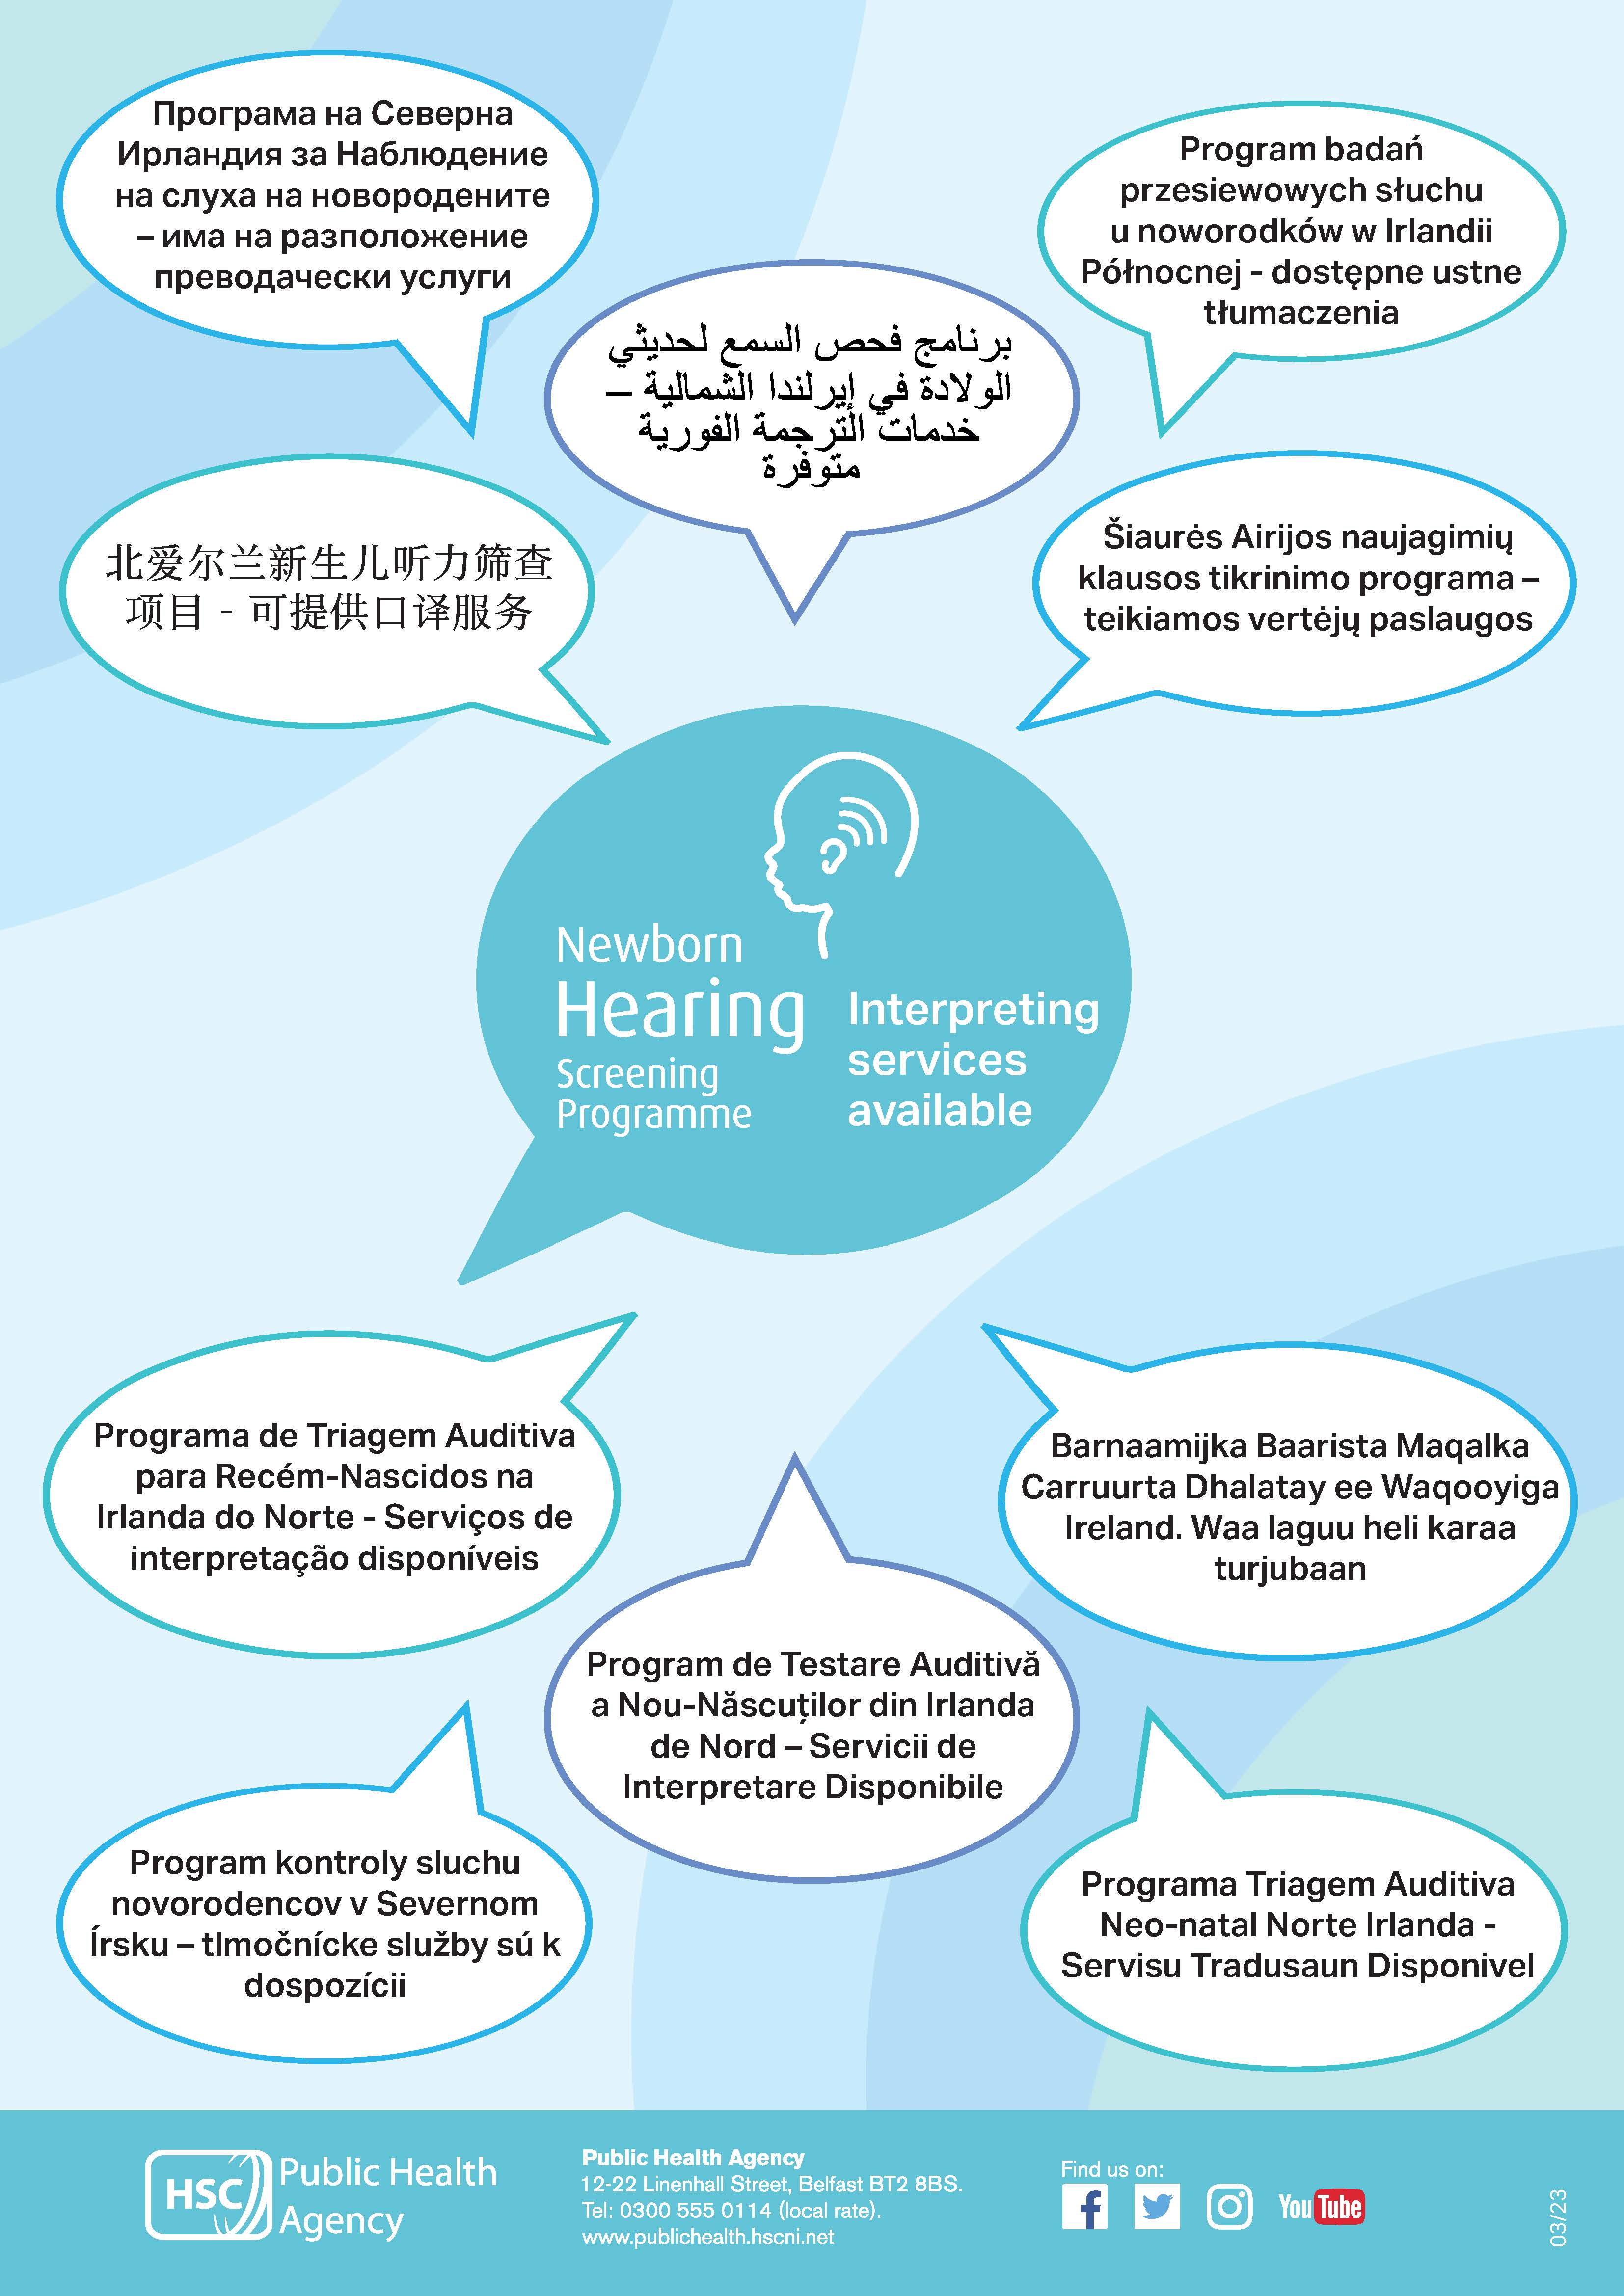 image of translations of newborn hearing service interpreting service available